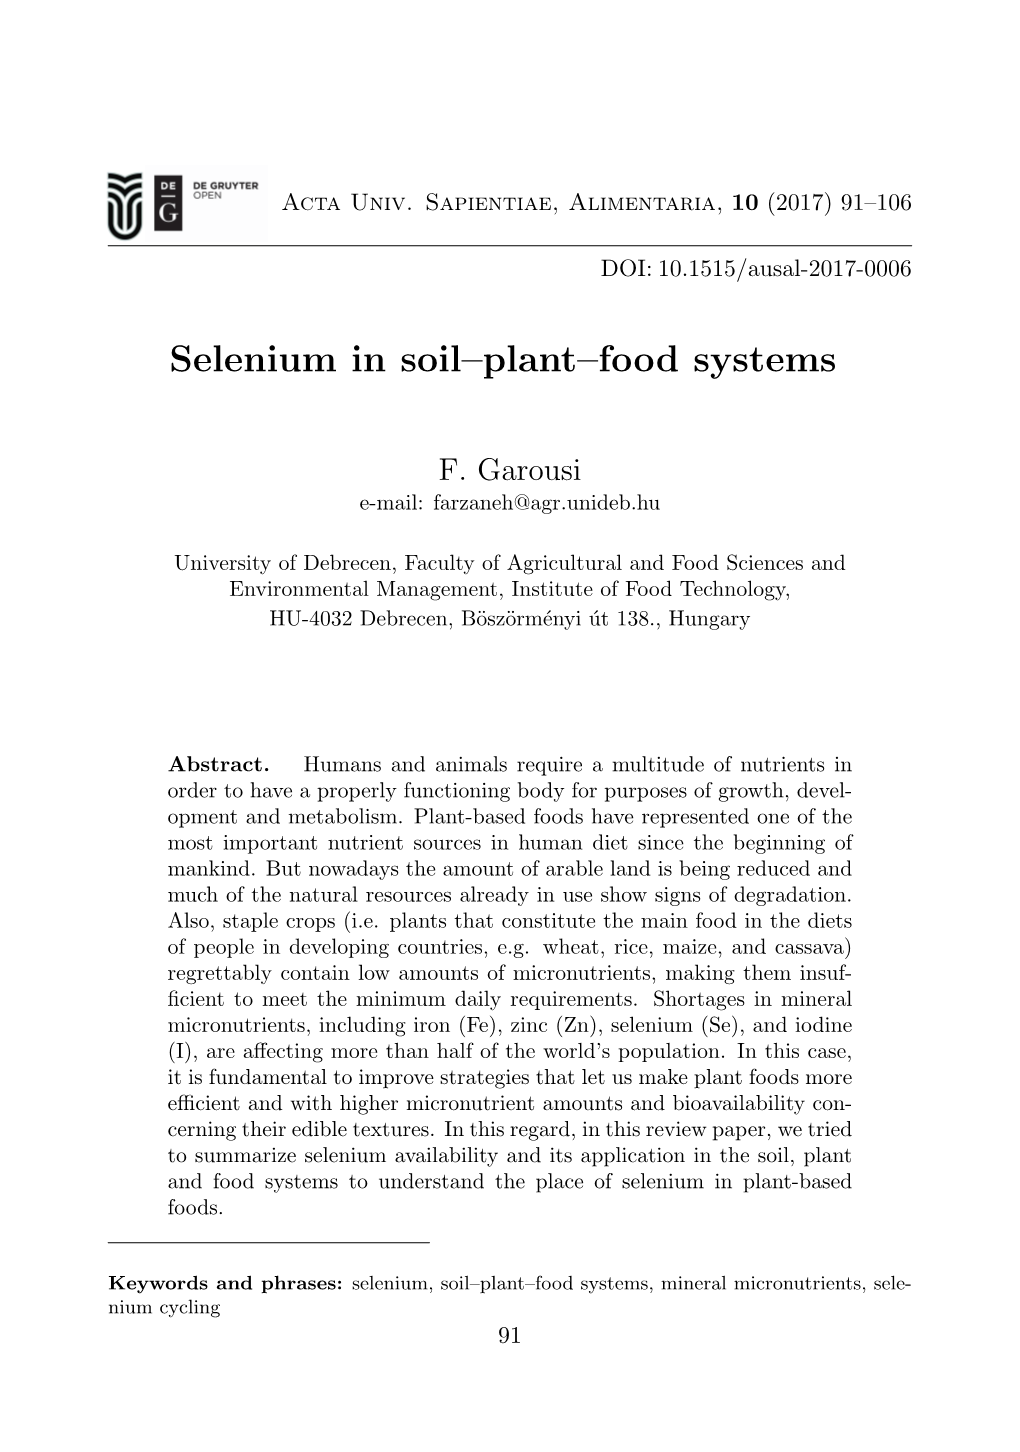 Selenium in Soil–Plant–Food Systems